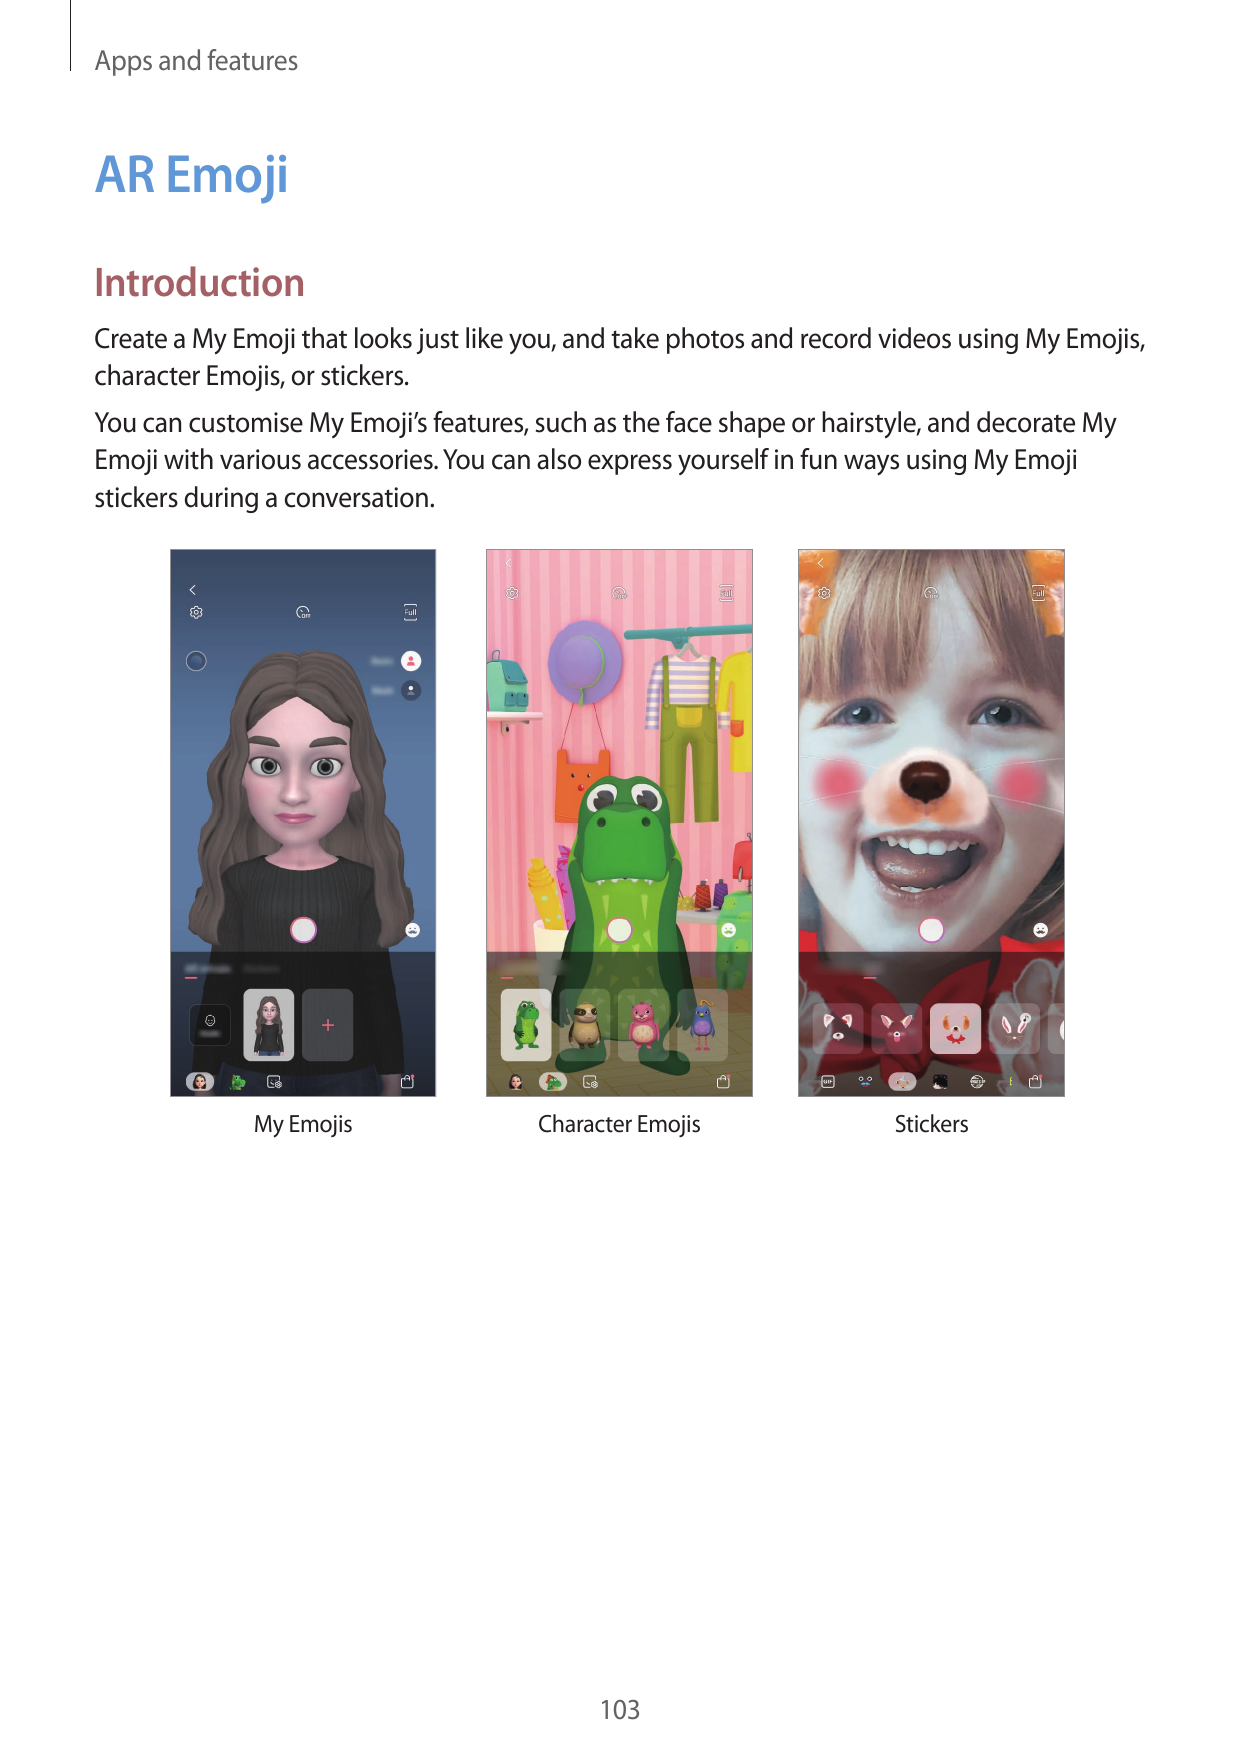 Apps and featuresAR EmojiIntroductionCreate a My Emoji that looks just like you, and take photos and record videos using My Emoj